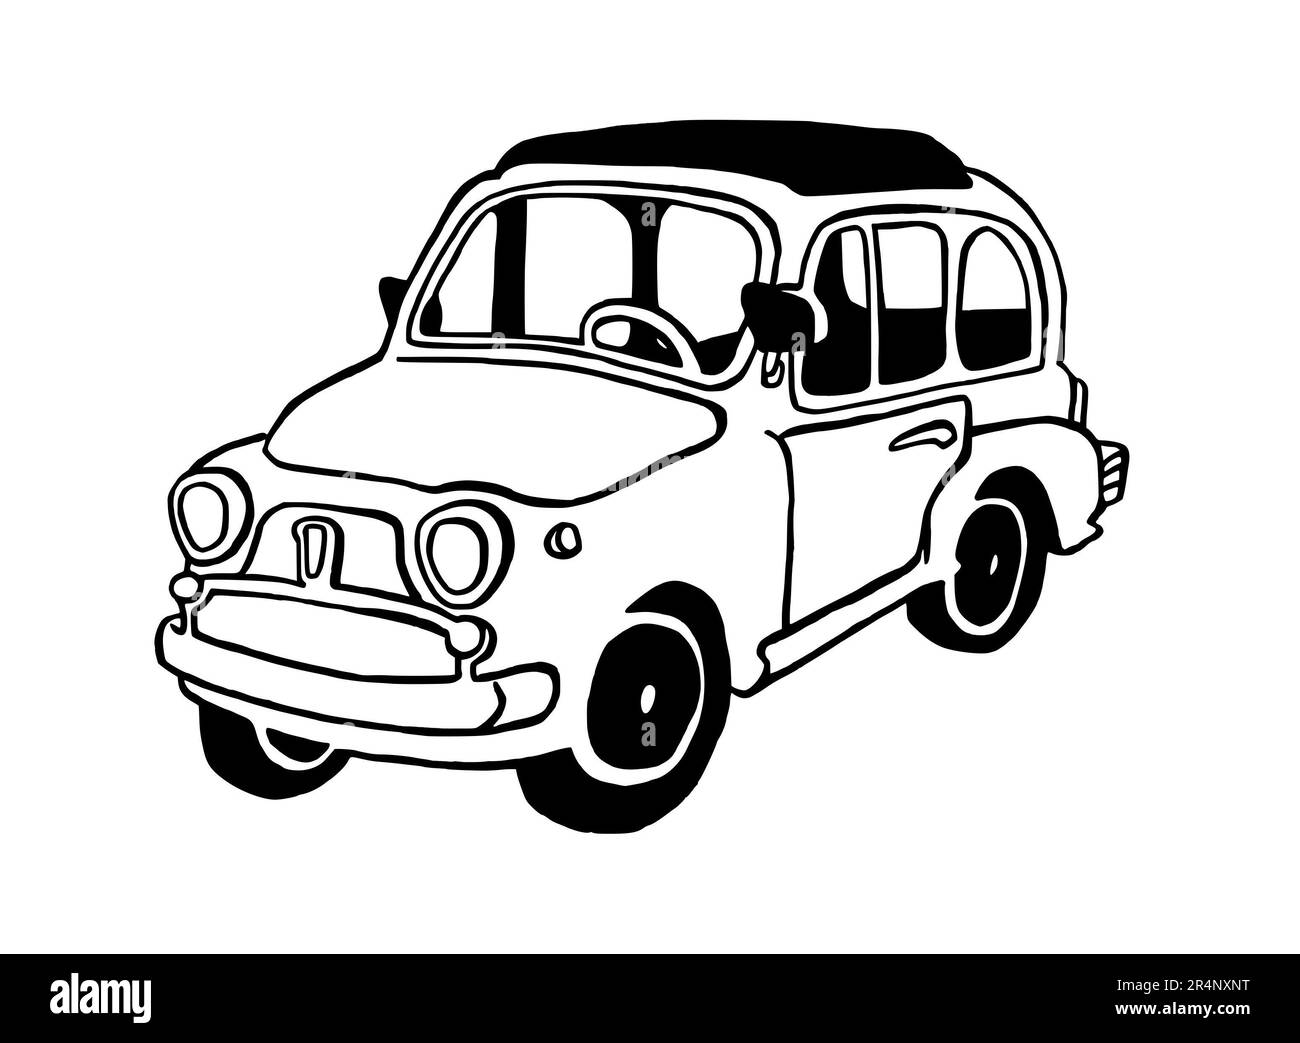 Hand drawn Illustration of a Retro Car,Italian, Full sized, isolated on a white background, with black line art Stock Photo